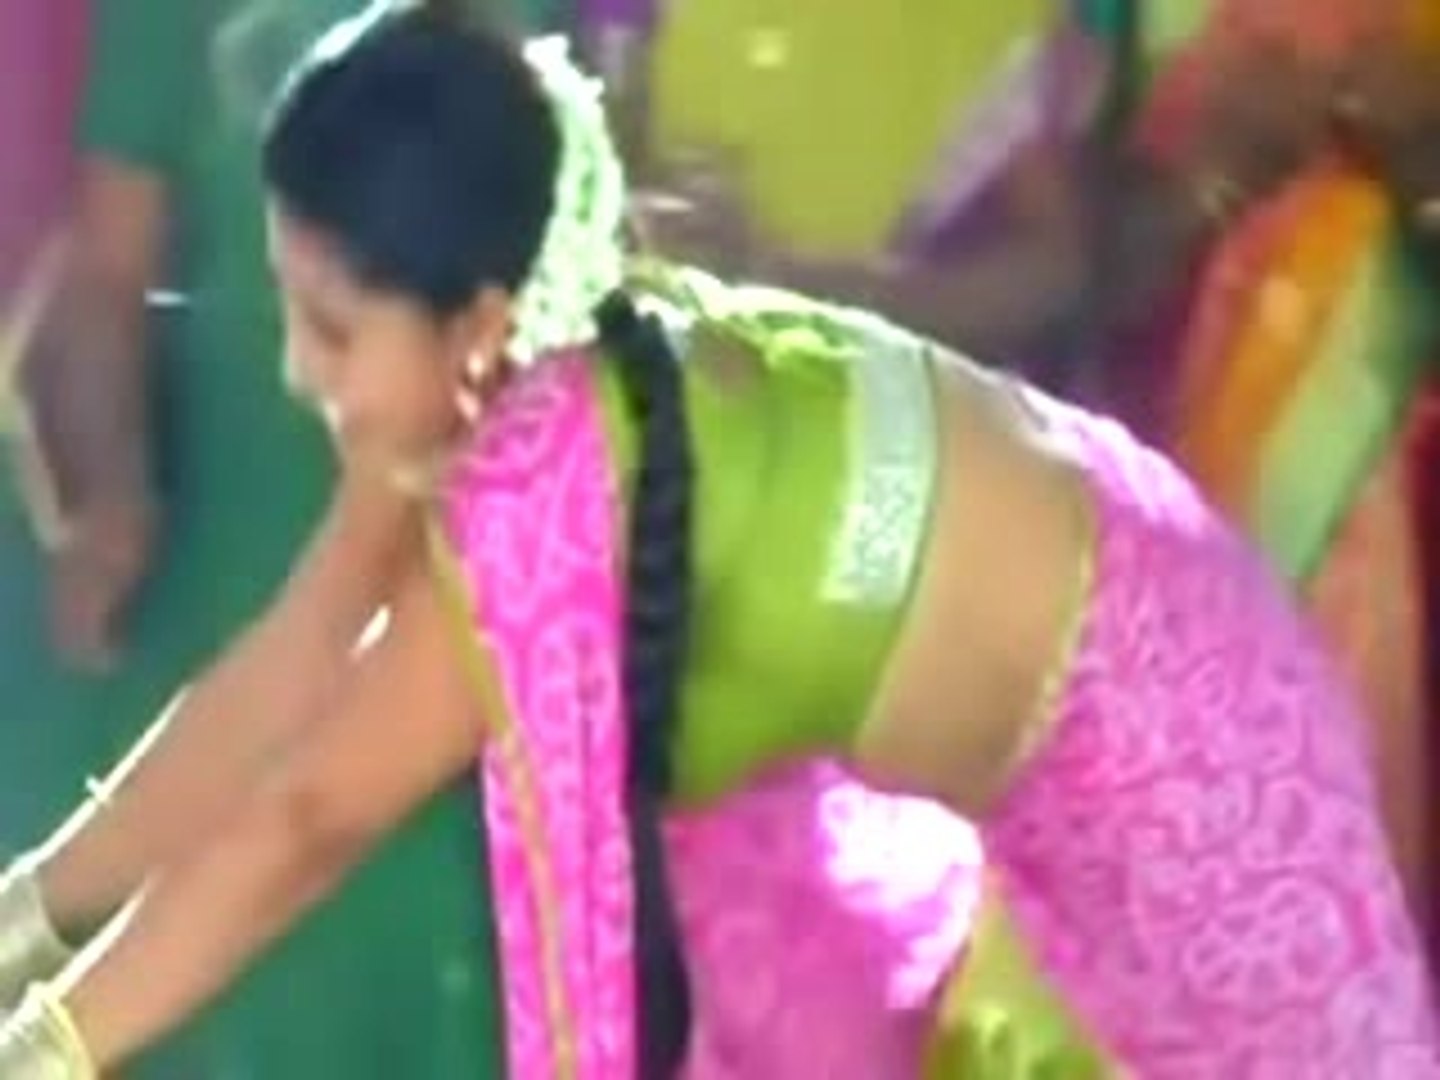 Tamil Actress Sneha hot navel show slow motion - video Dailymotion